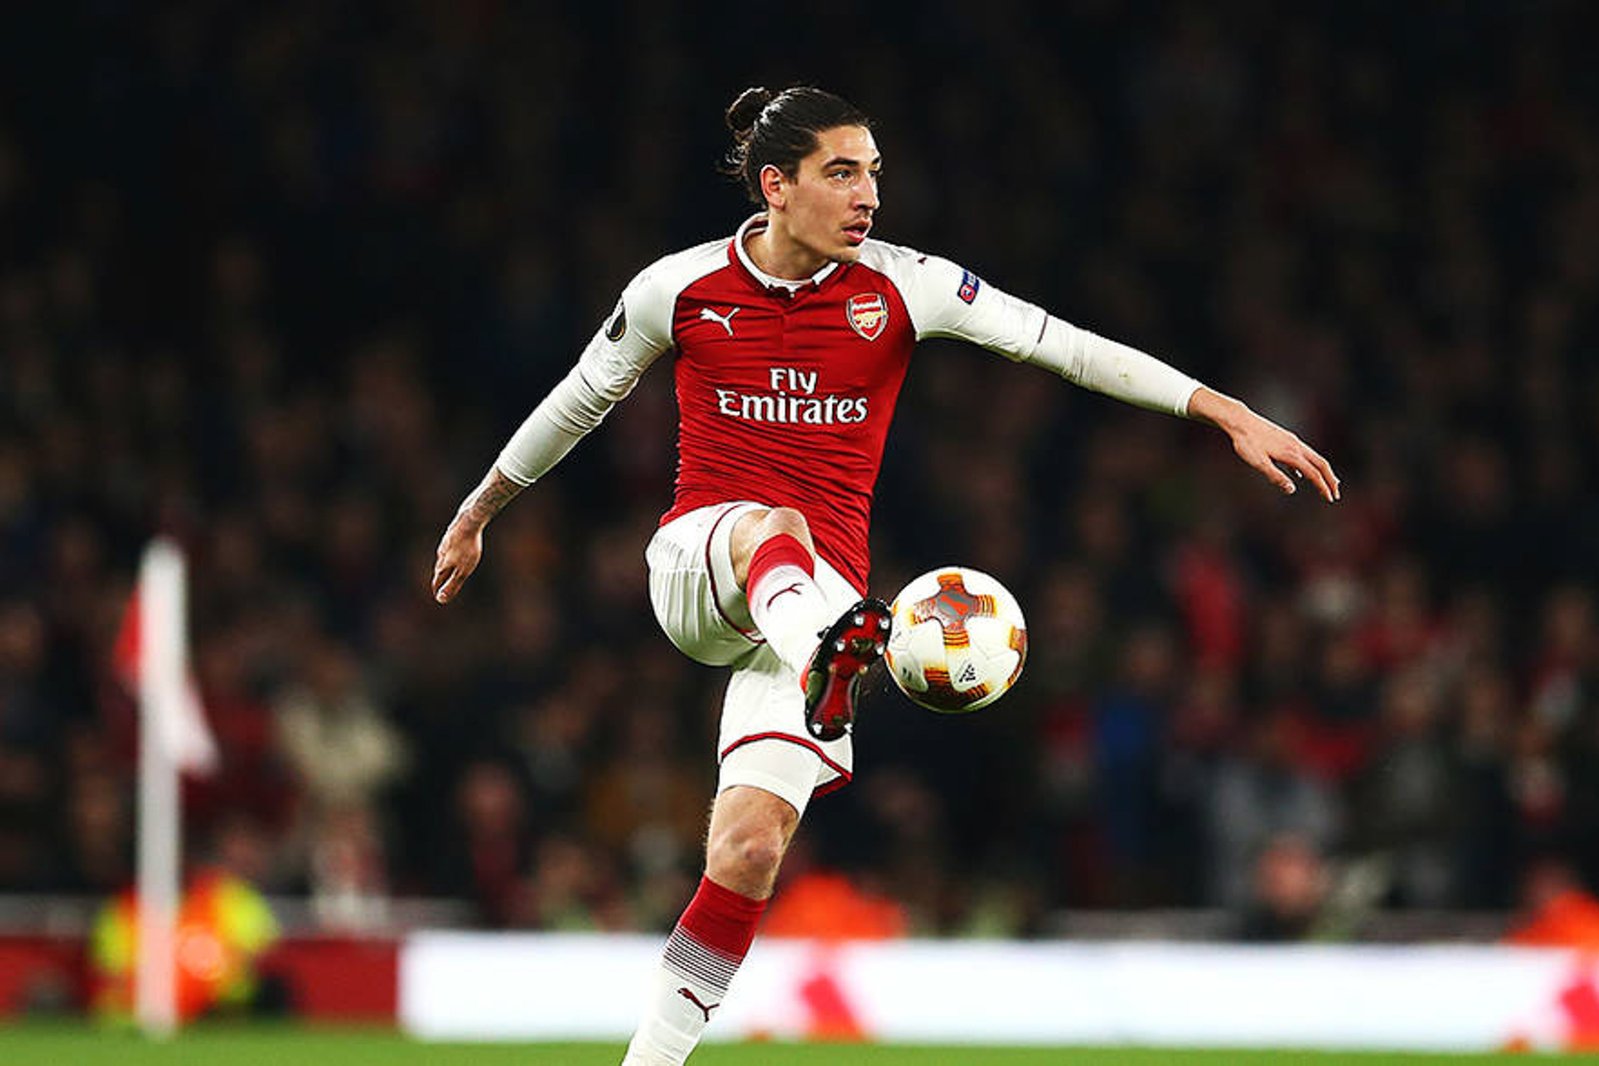 Arsenal's Hector Bellerin Is Planting 58,617 Trees in the Amazon